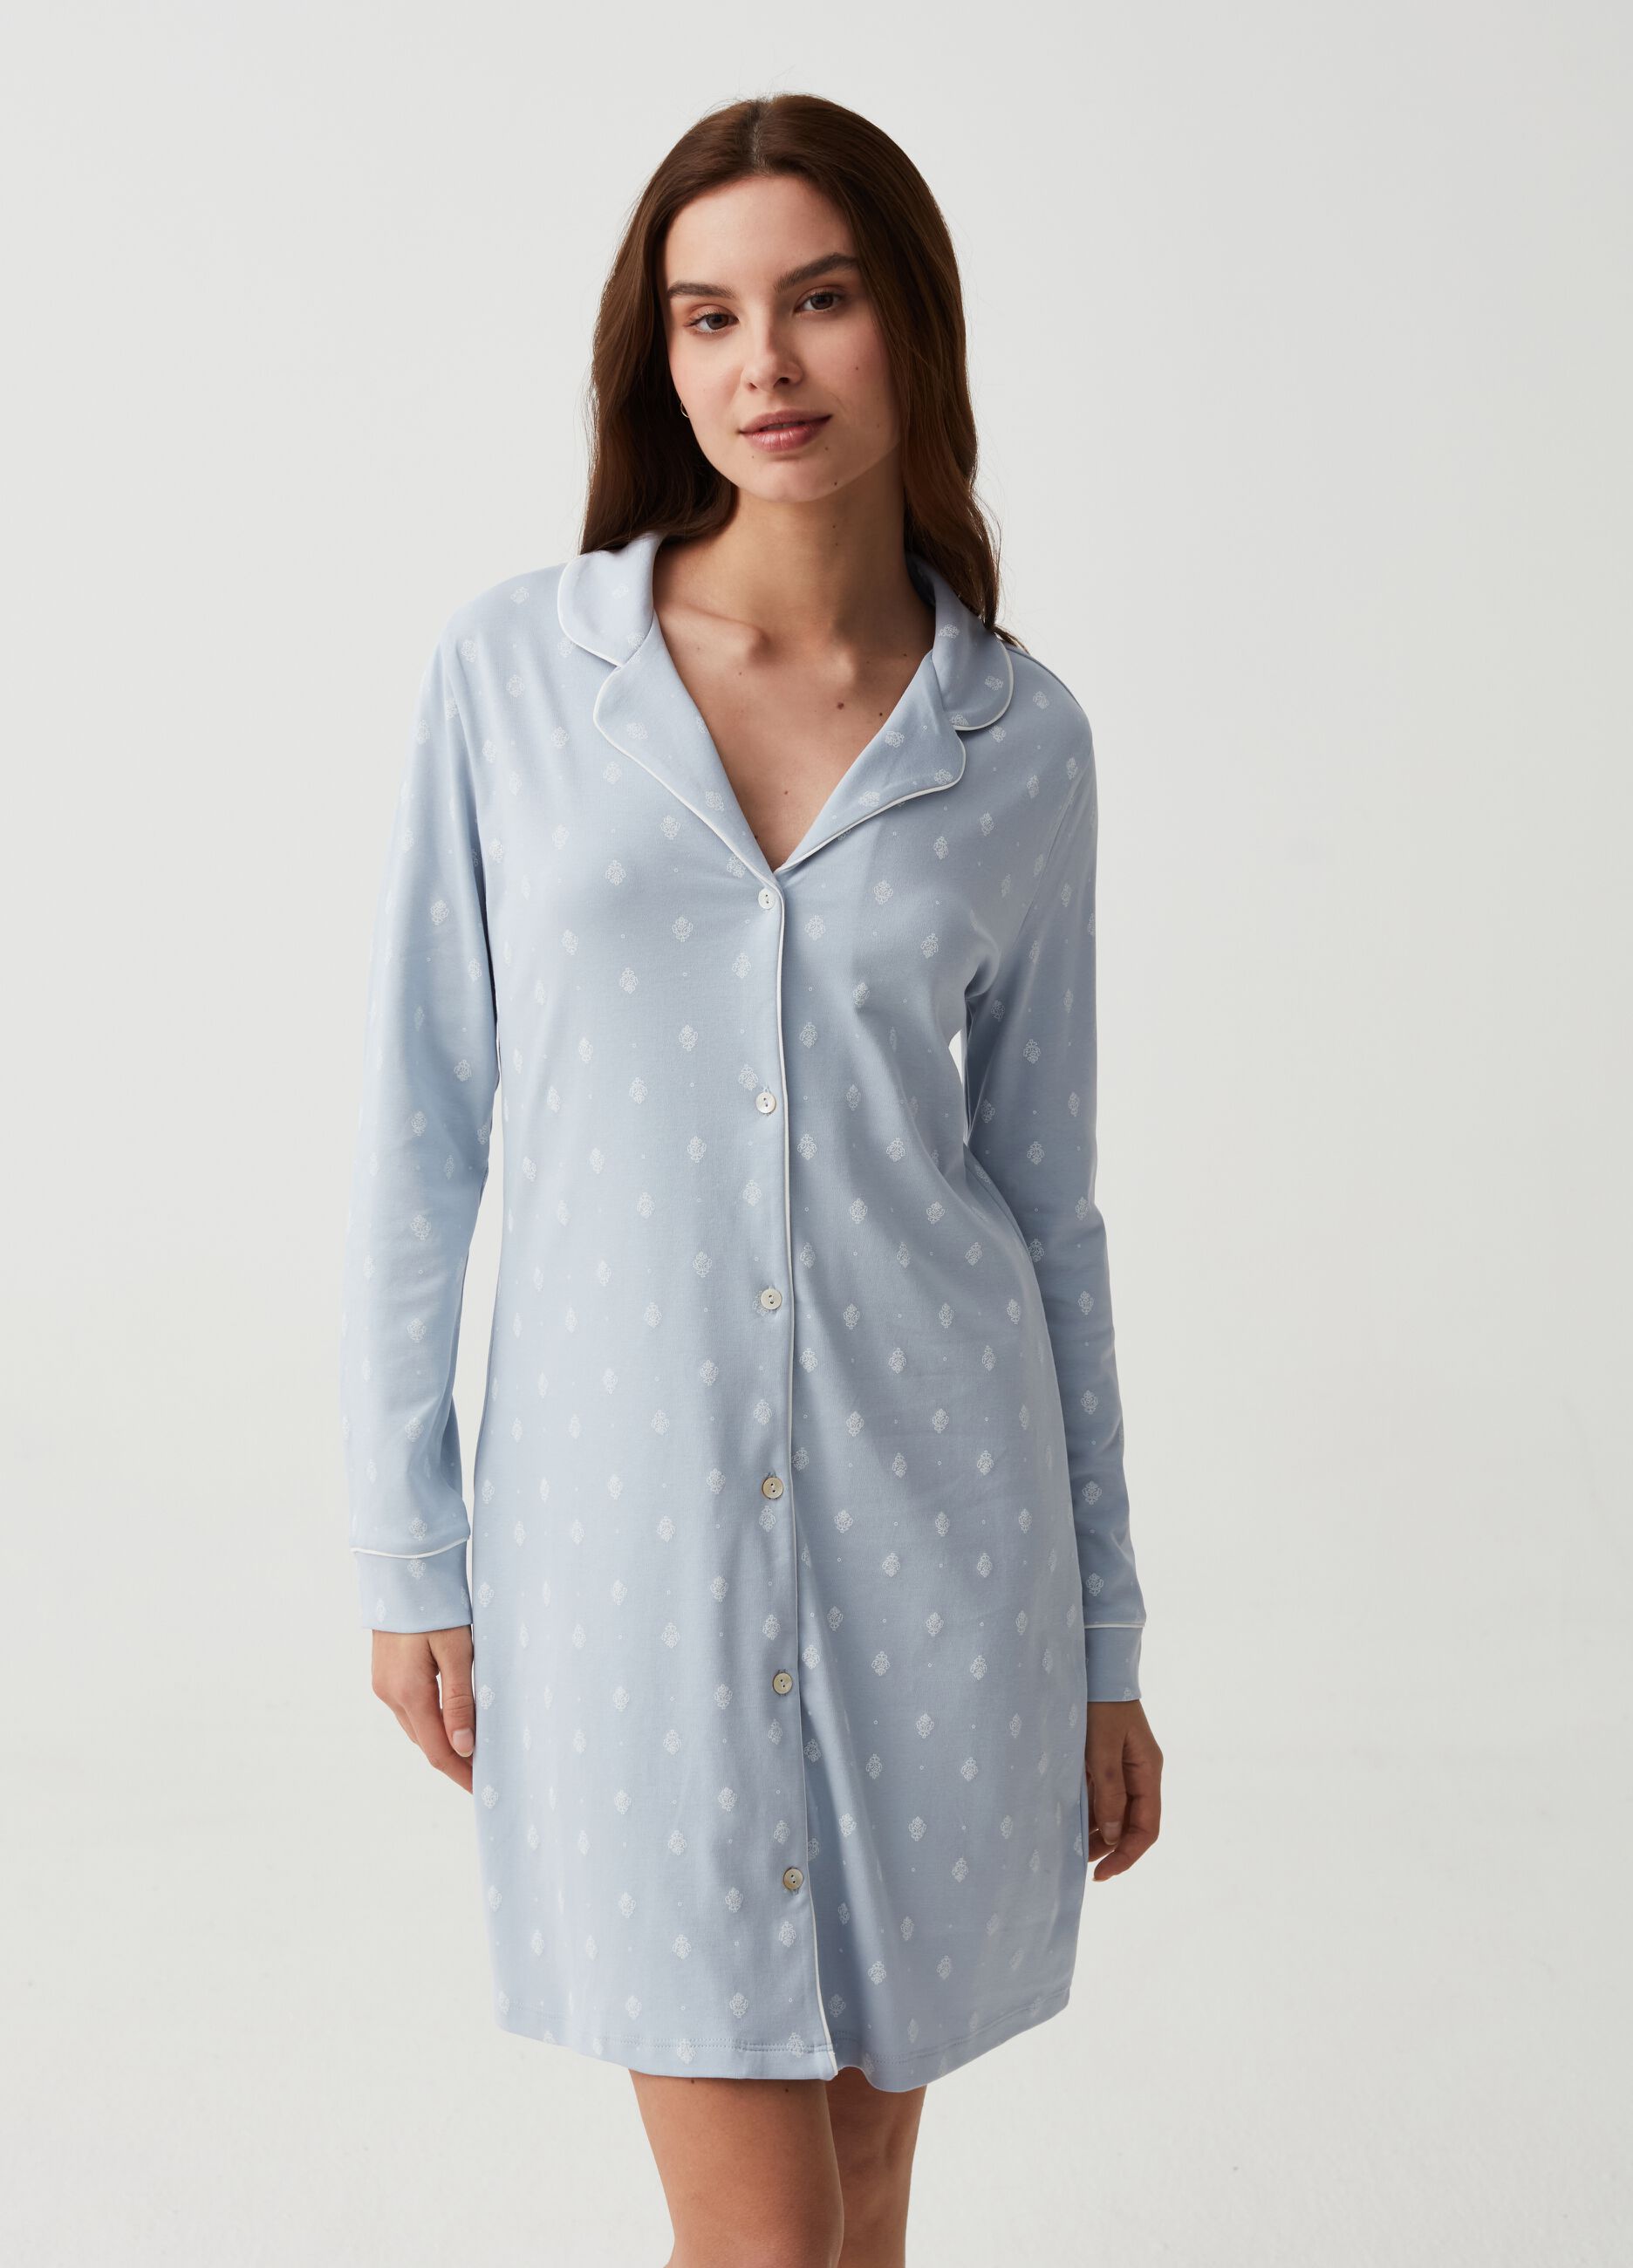 Nightdress with buttons and arabesque print